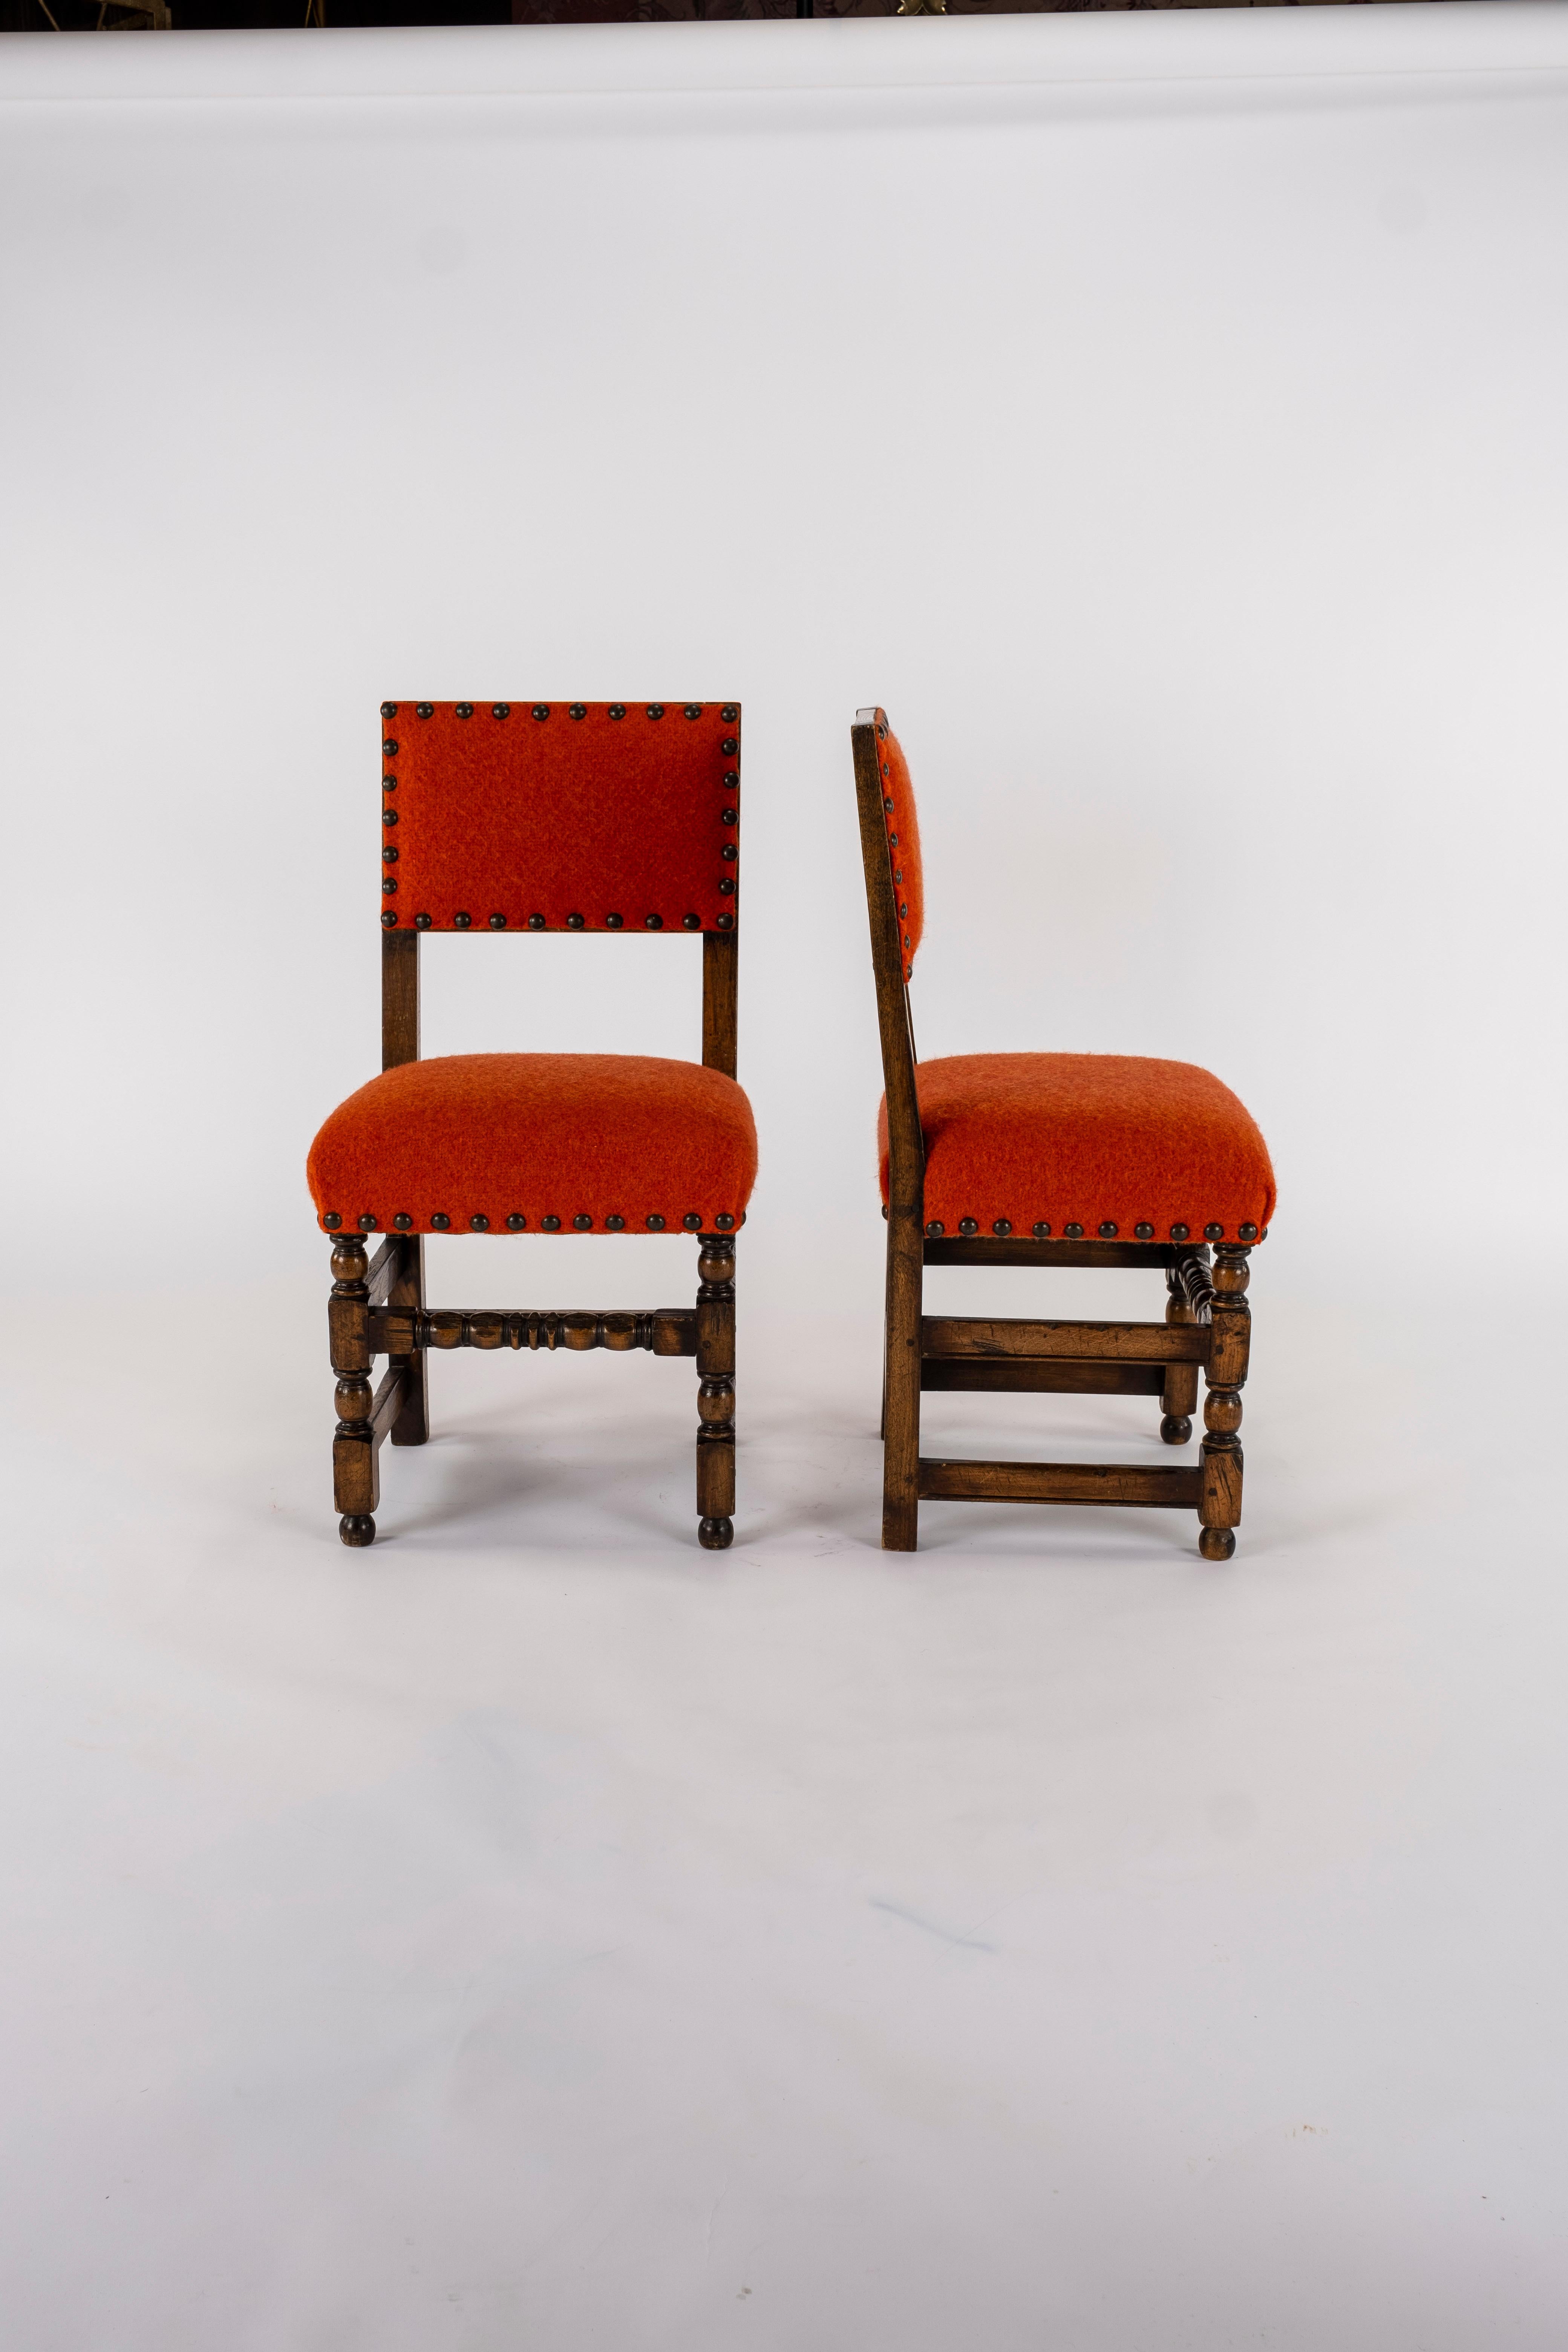 Wool Pair of 19th Century Orange Red Louis XIII Style Walnut Chairs